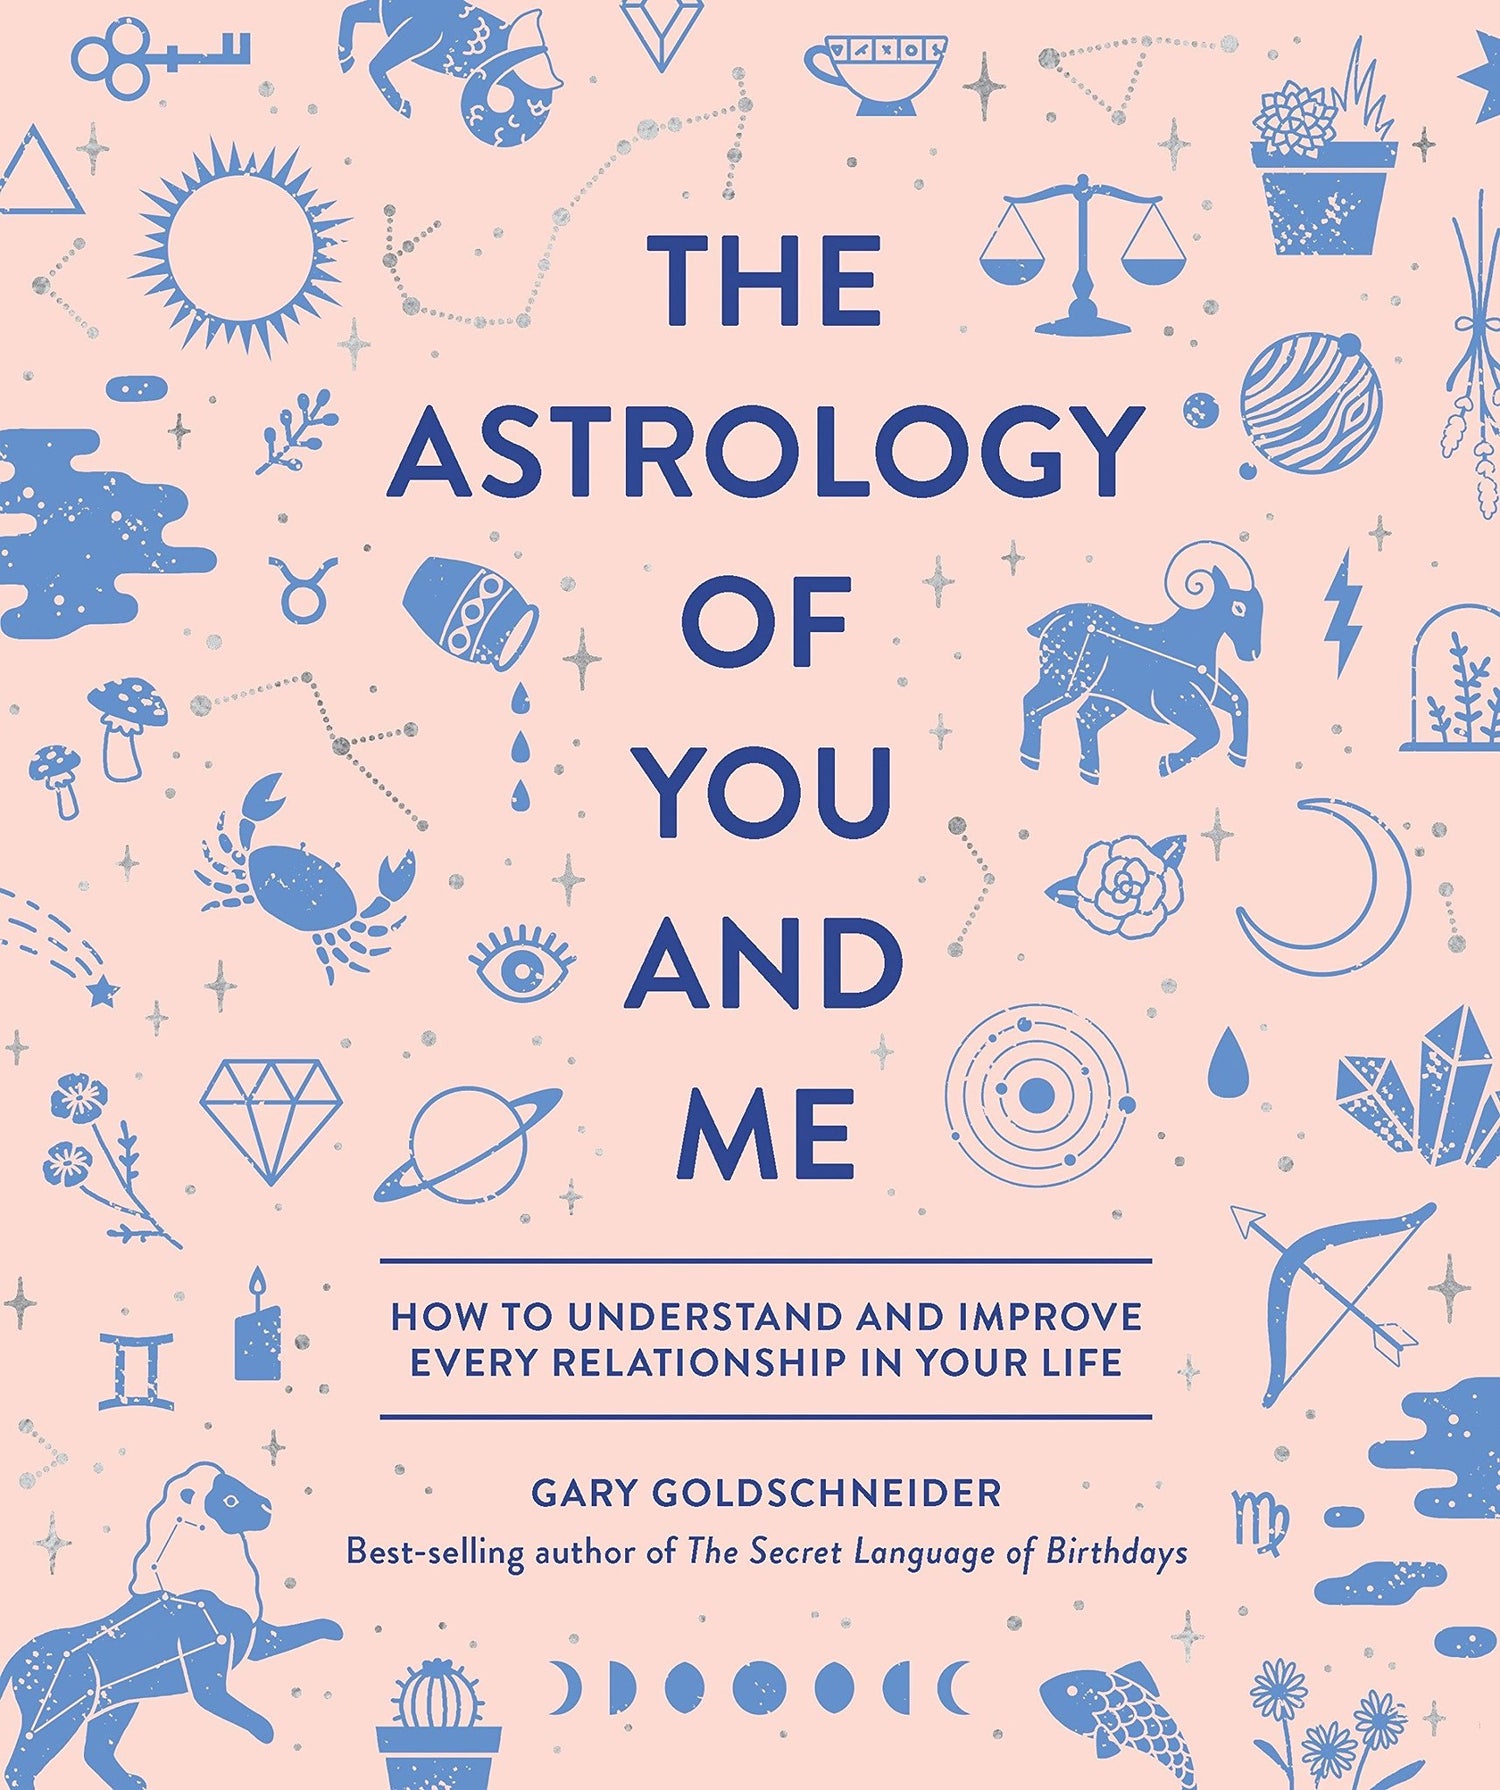 Book cover of The Astrology of You and Me, how to understand and improve every relationship in your life, by Gary Goldschneider.